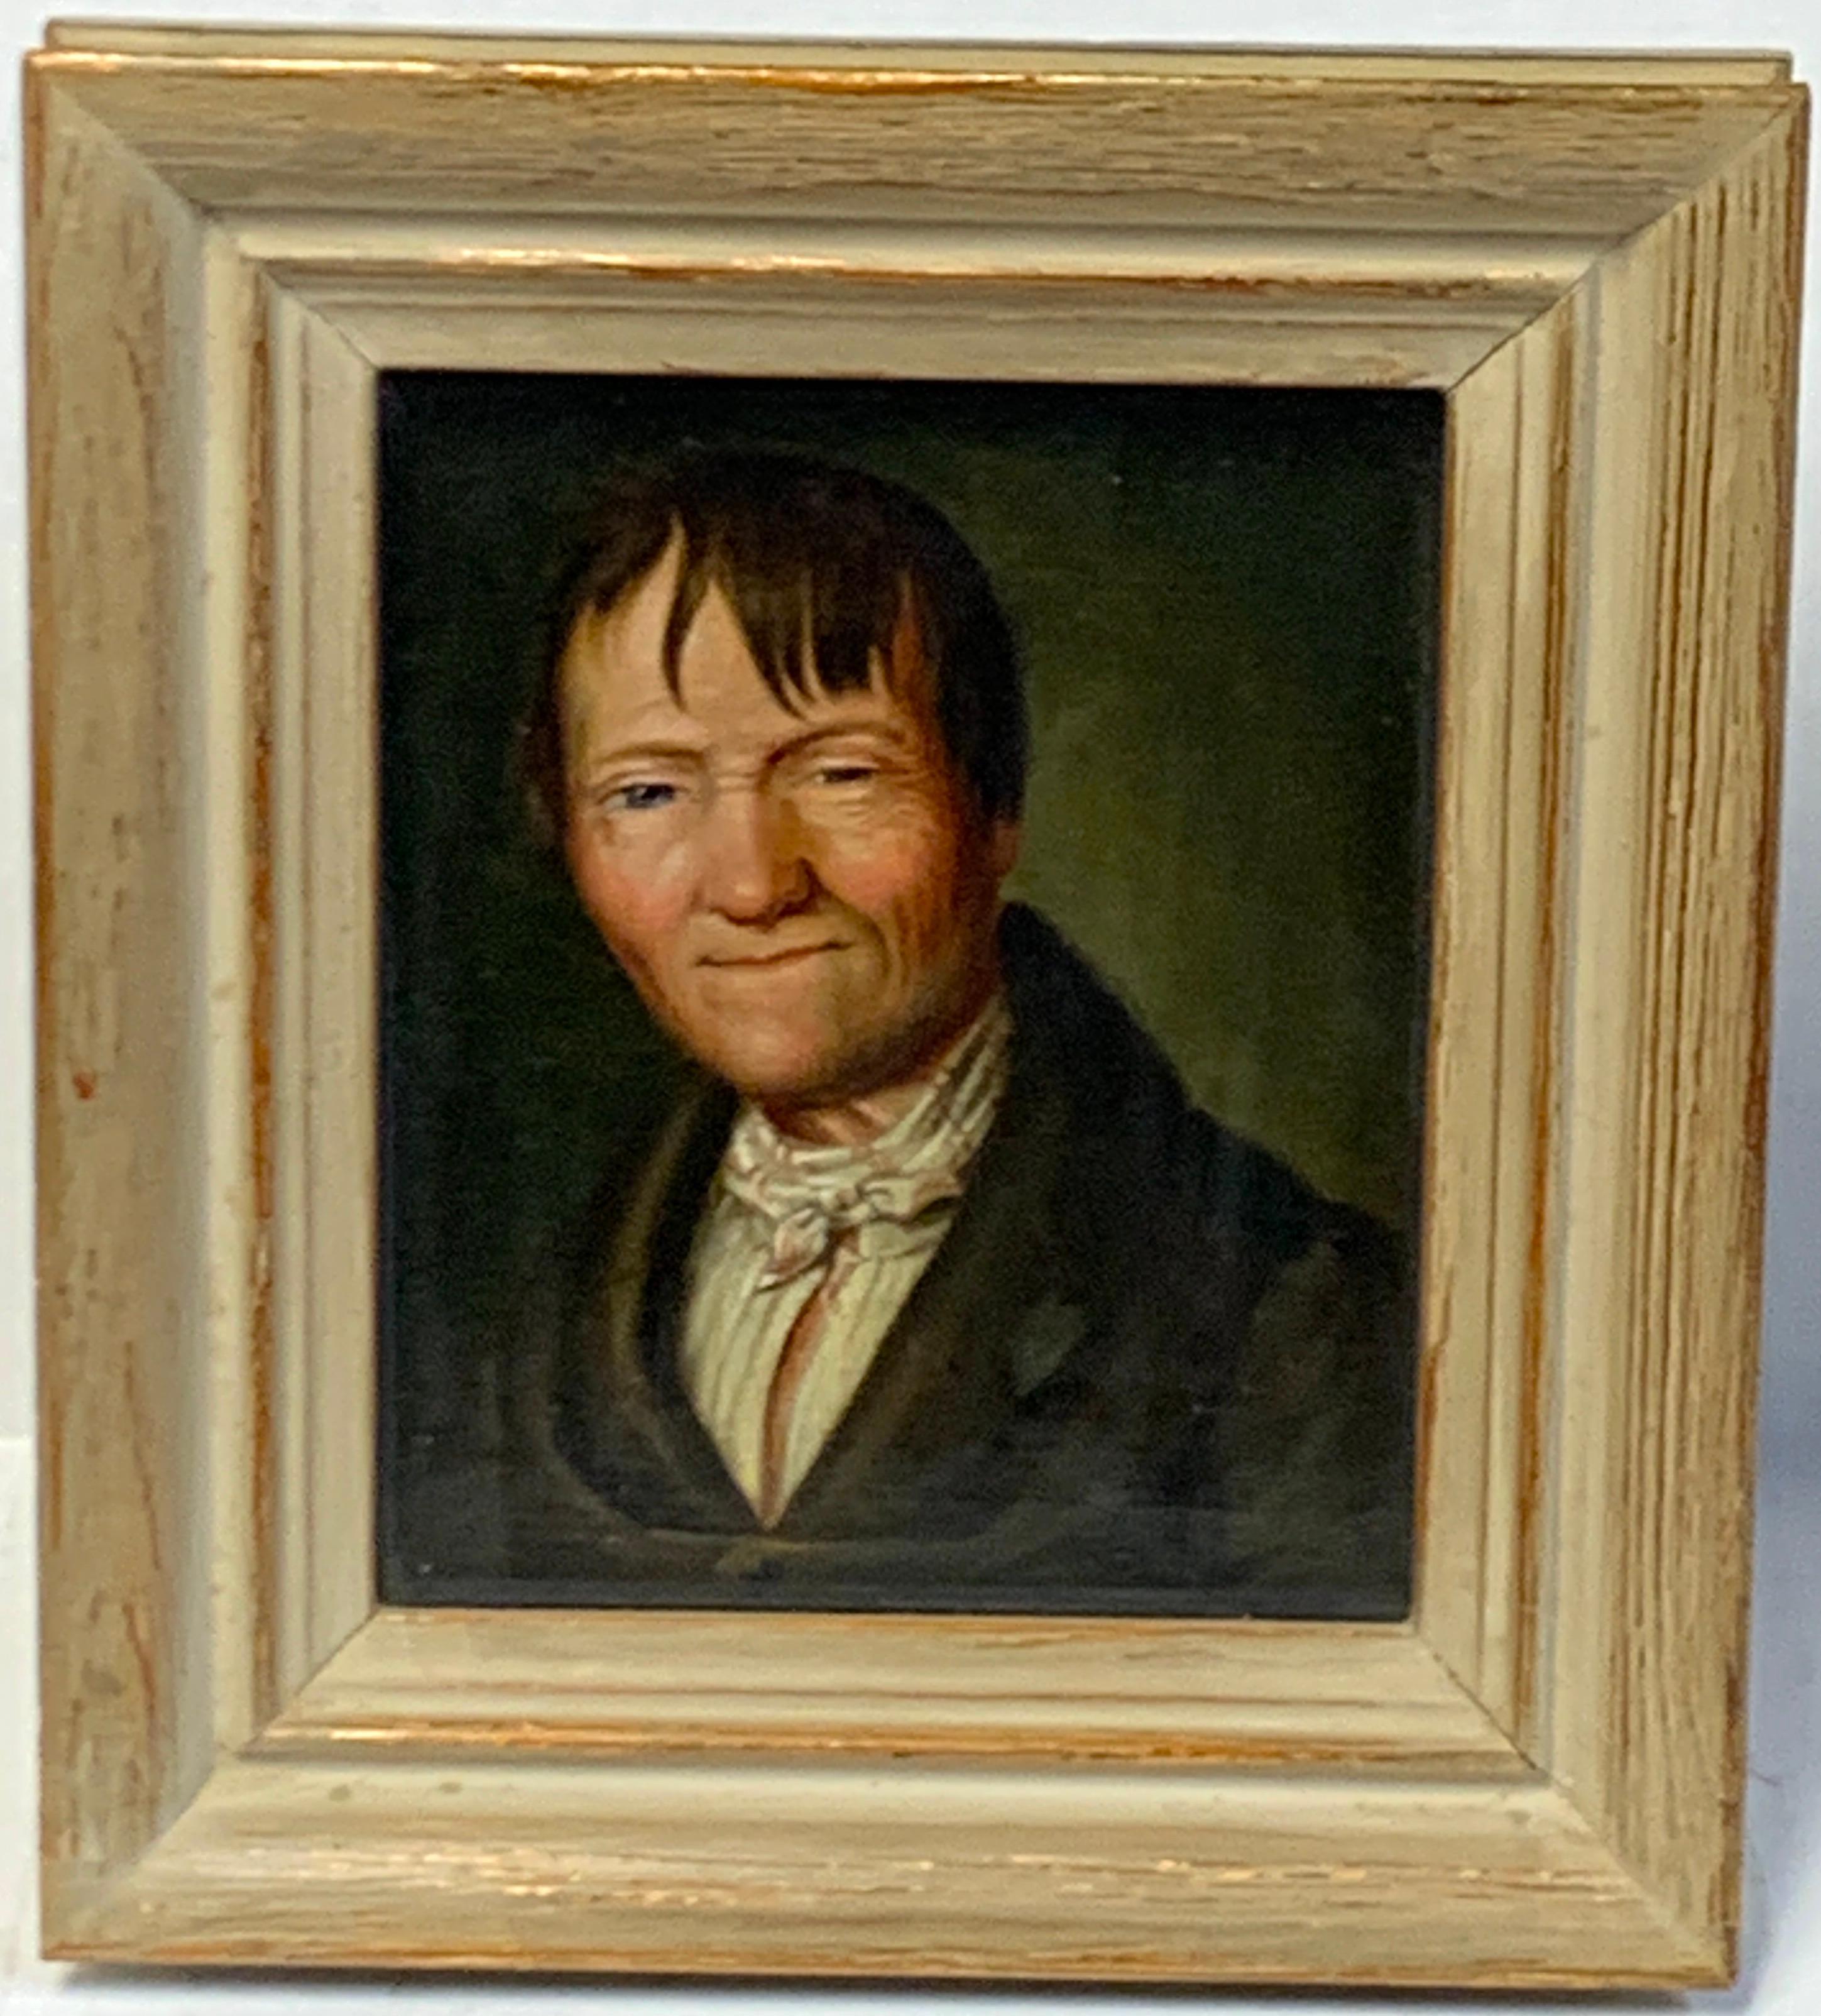 Miniature portrait of a sleepy eyed man, circle Christian Wilhelm Ernst Dietrich
Germany 18th century, inscribed on back, refer to photo
Exceptional quality
Oil on canvas, laid down 4